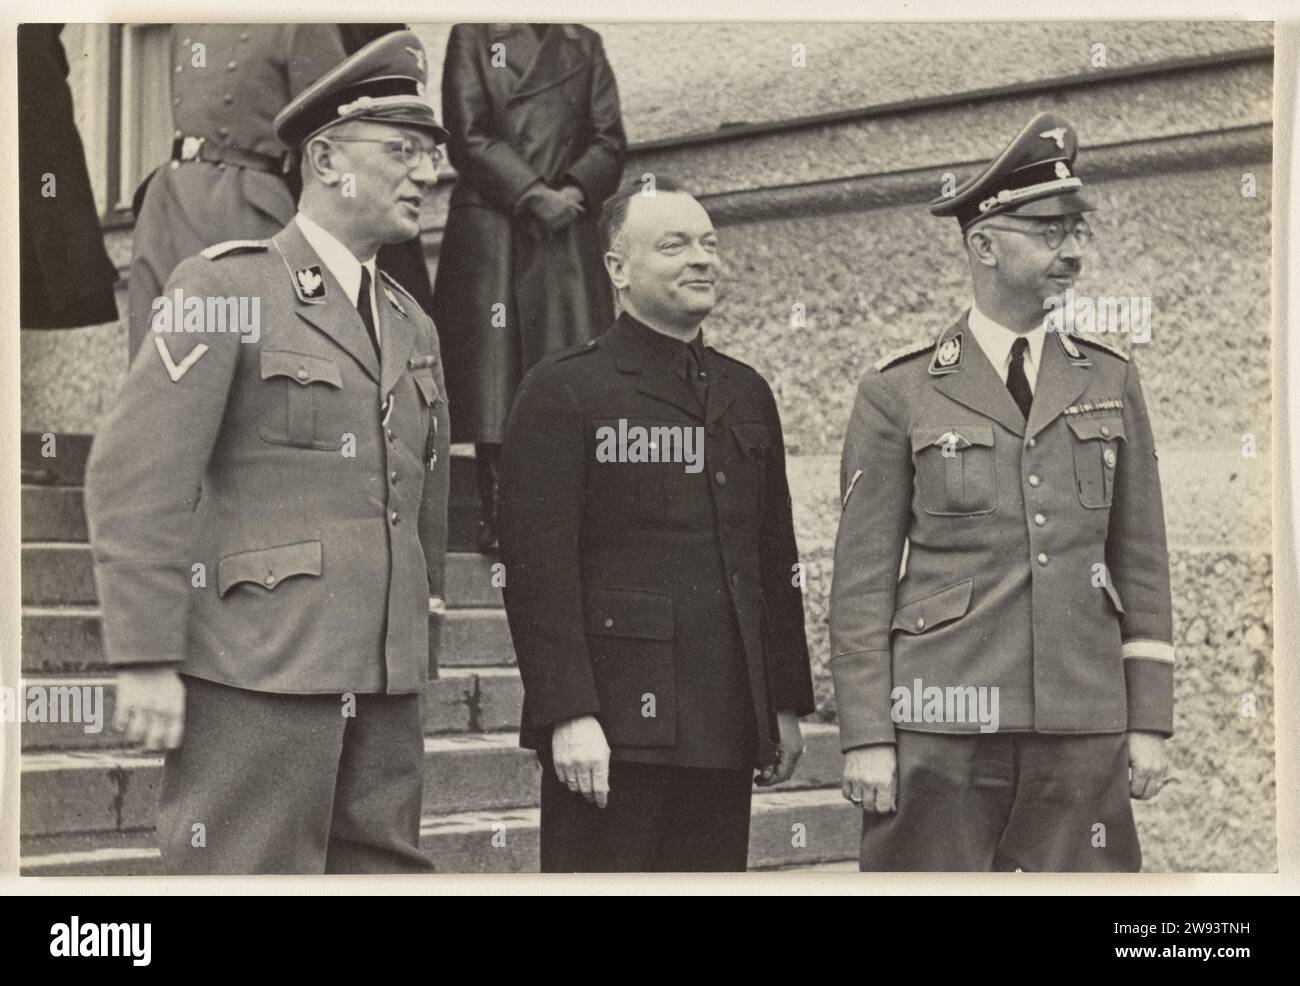 Seyss Inquart, Mussert and Himmler, 1940 - 1944 photograph Three soldiers posing for a staircase in uniform. From left to right: A. Seyss Inquart, Rijks commissioner for the Netherlands, A. Mussert, leader of the NSB and H. Himmler, Reichsführer der SS. Netherlands photographic support   Netherlands Stock Photo